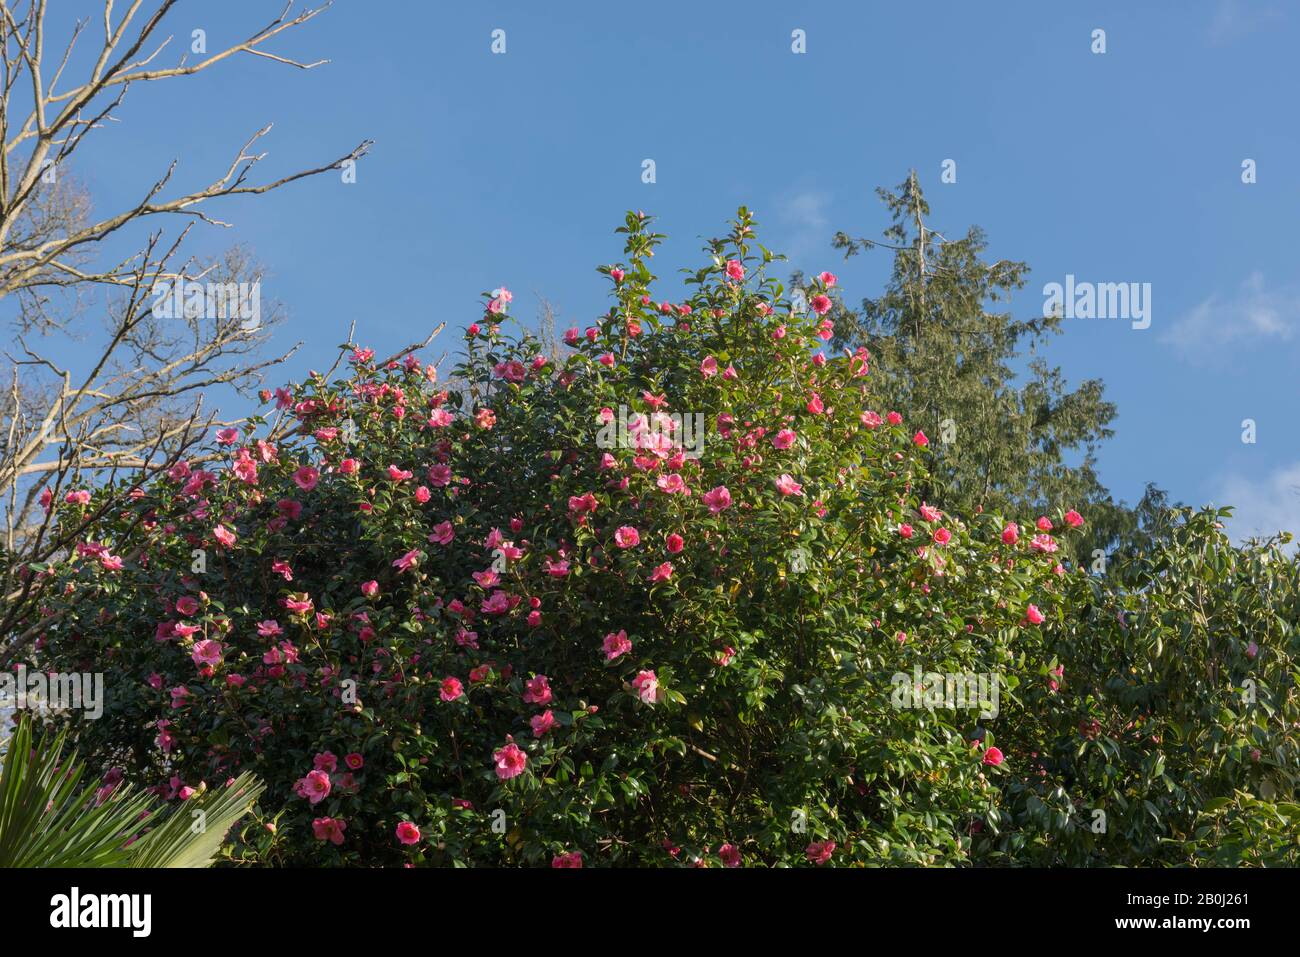 Winter Flowering Pink Camellia Shrub (Camellia x williamsii 'Saint Ewe') with a Blue Sky Background in a Country Cottage Garden in Rural Devon, Englan Stock Photo